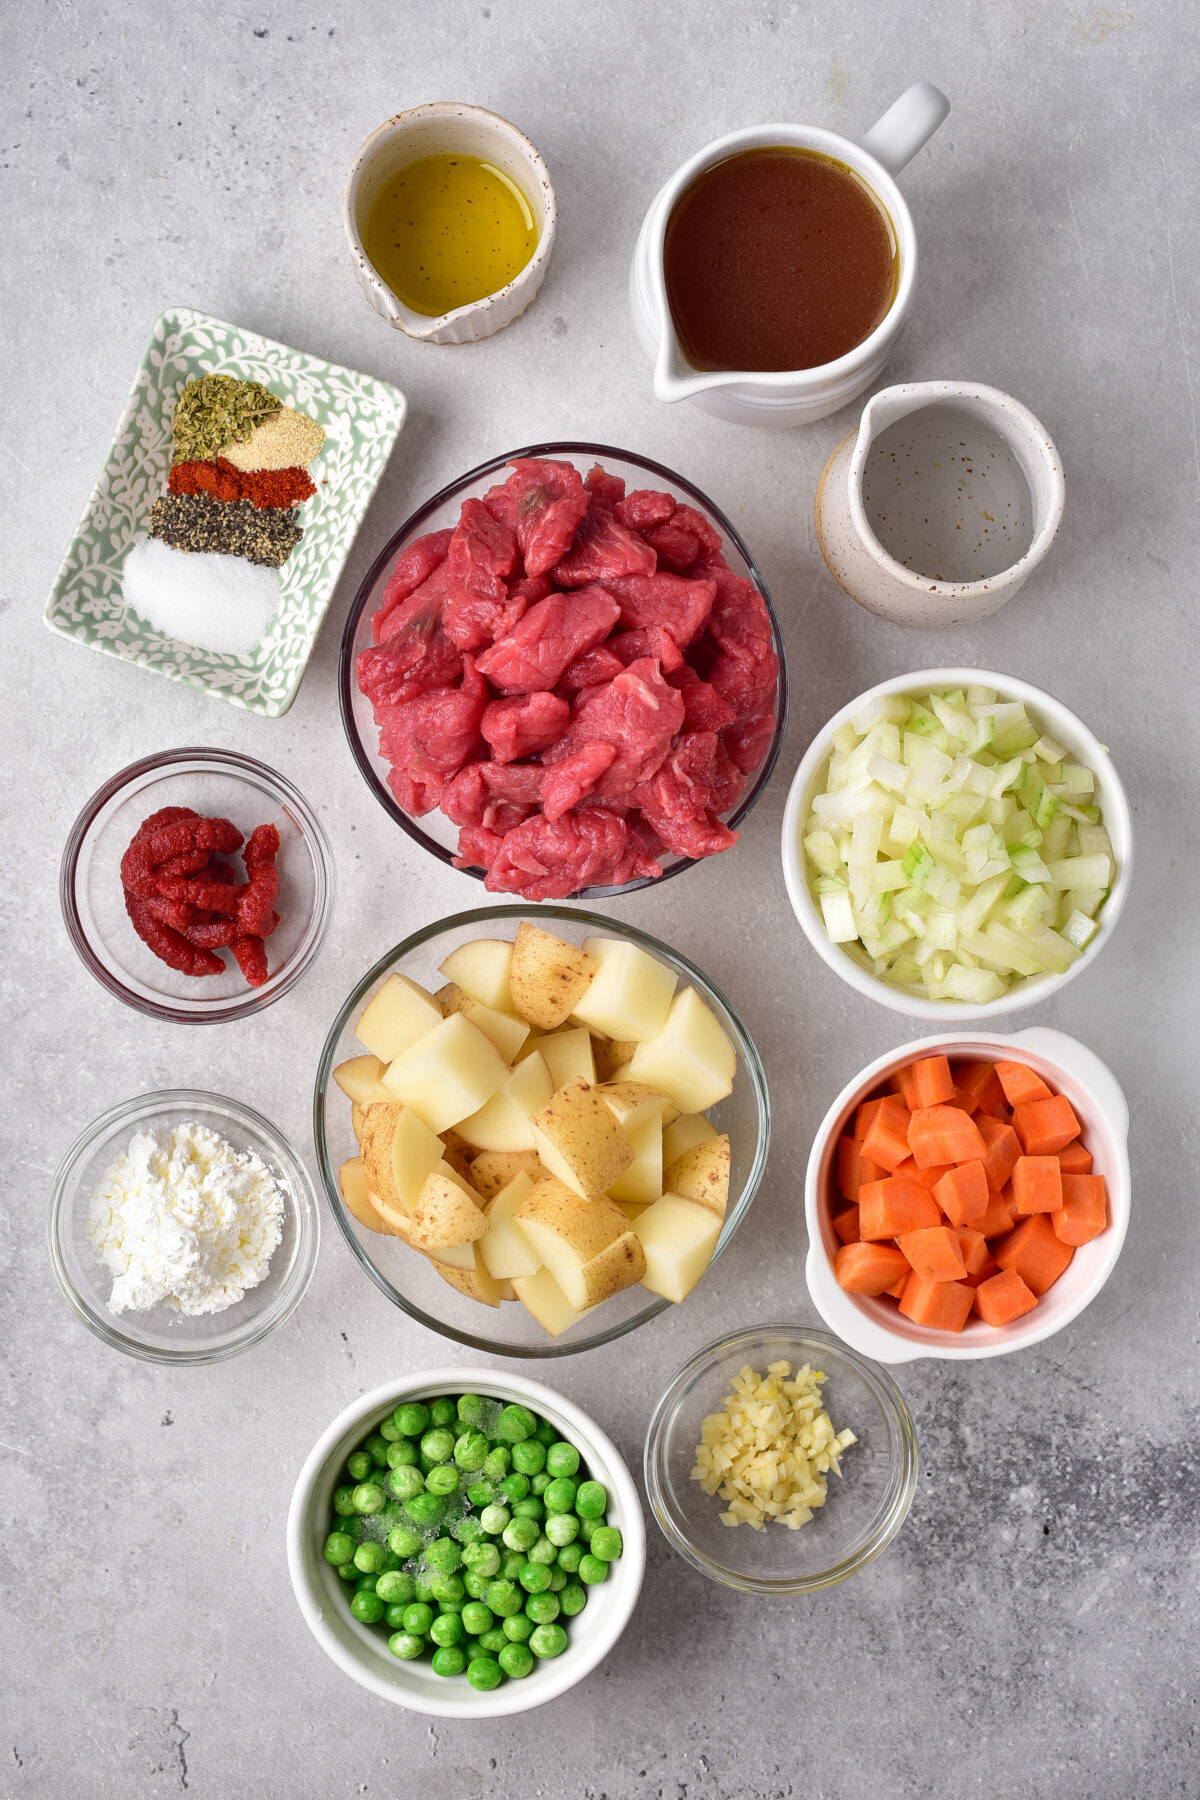 Ingredients for Beef Stew prepared and placed in small bowls.